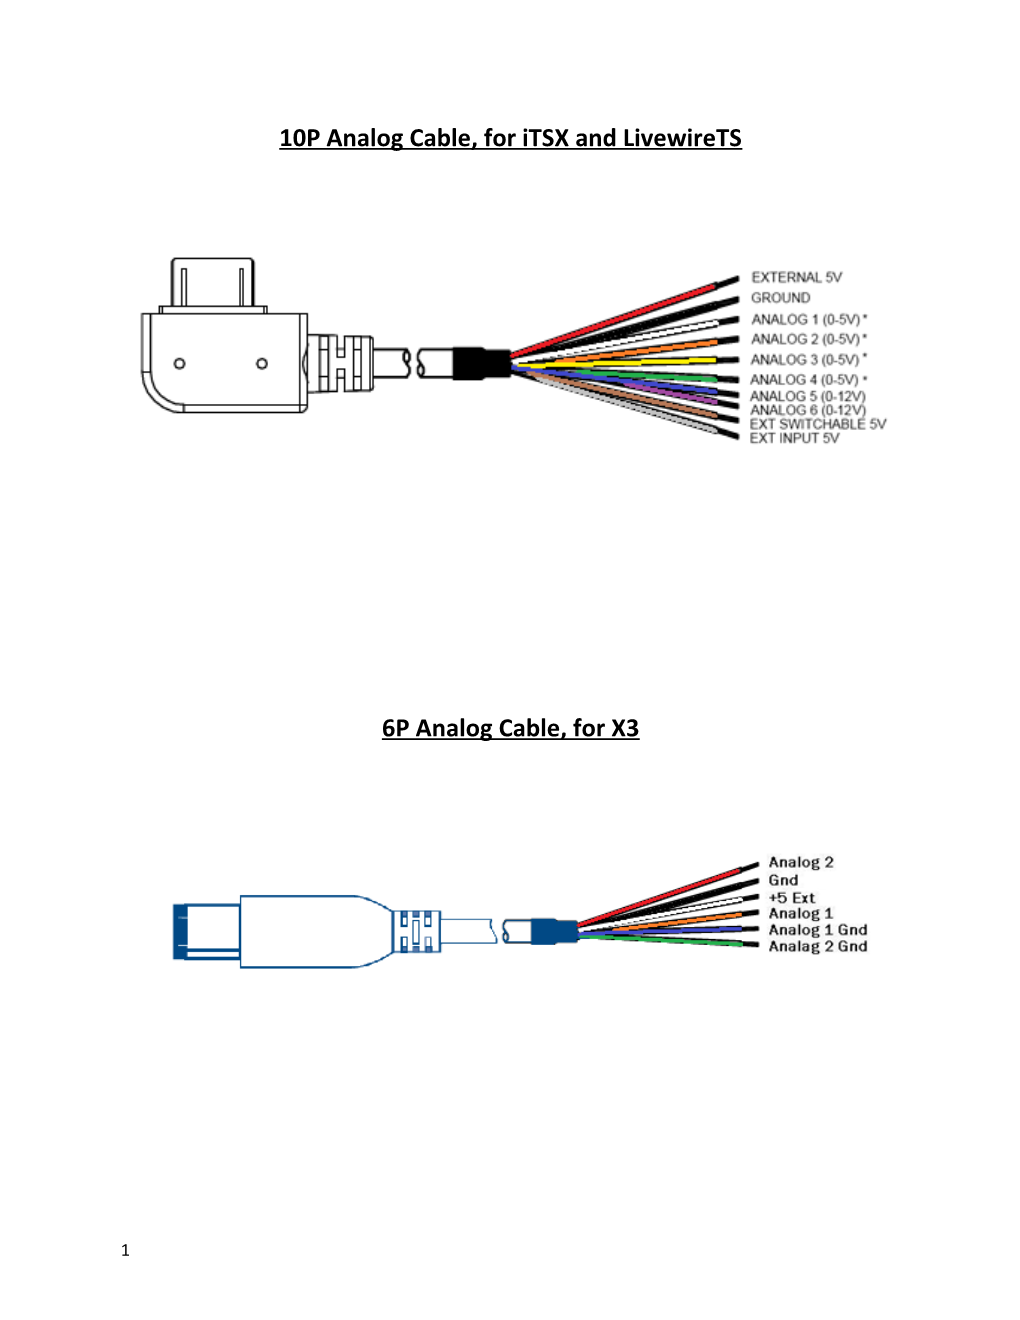 10P Analog Cable, for Itsx and Livewirets